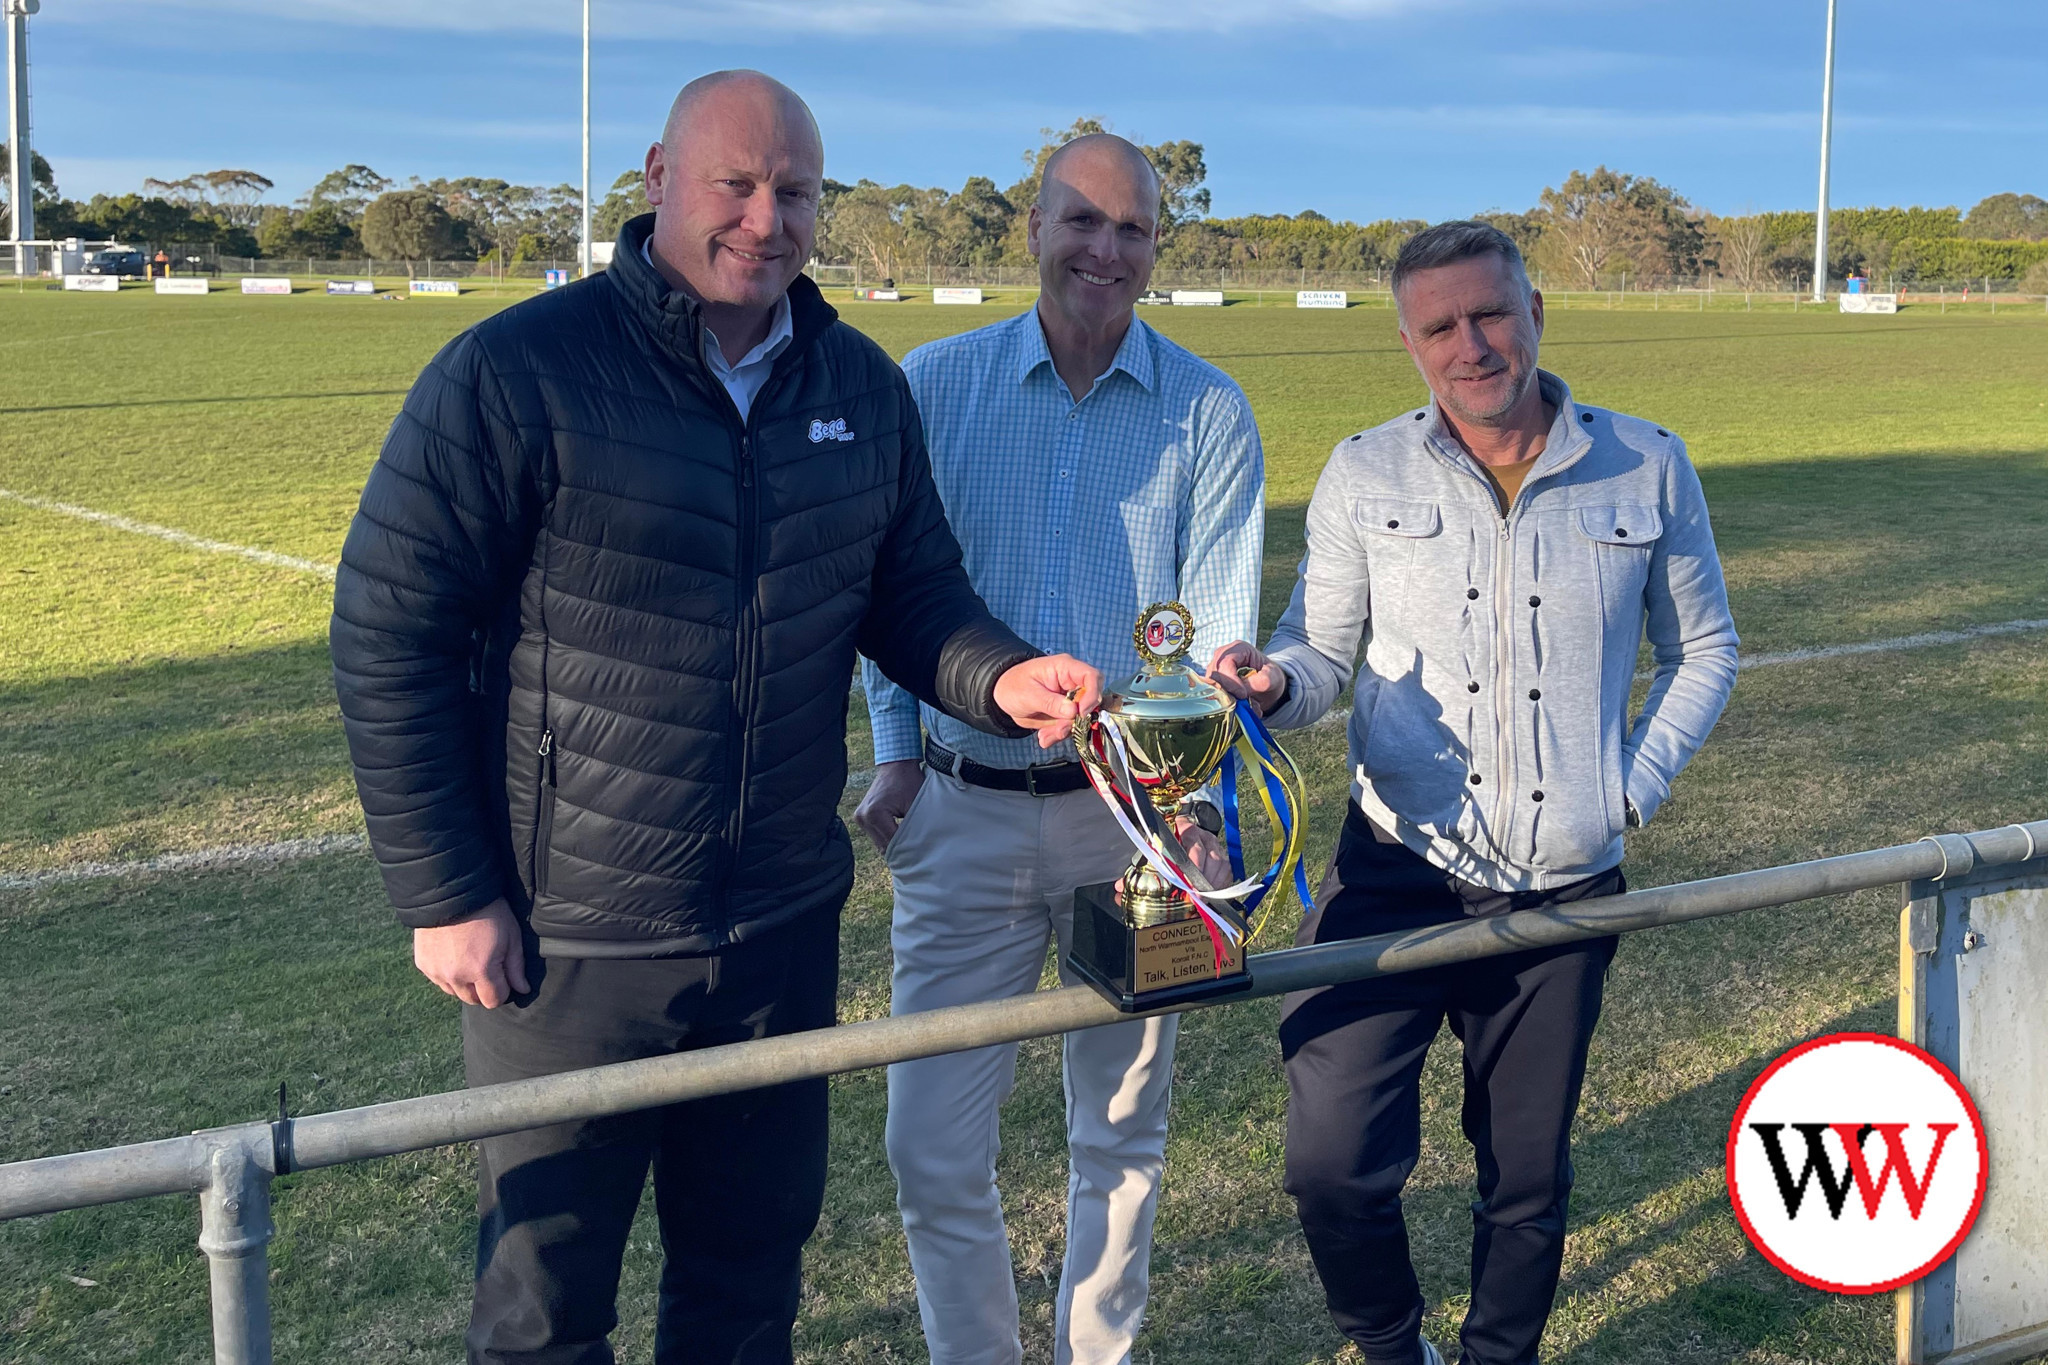 Next week’s round 15 clash between North Warrnambool and Koroit will hold special significance for both clubs as they remember those lost to suicide. Not only will the Eagles and the Saints be playing for four points, they will be playing for the ‘Connect Cup’ in honour of loved ones, friends and family members – and Mark Bowman, Brian White, and Matt Jellie (pictured) invite everyone to join them at Bushfield to pay tribute.